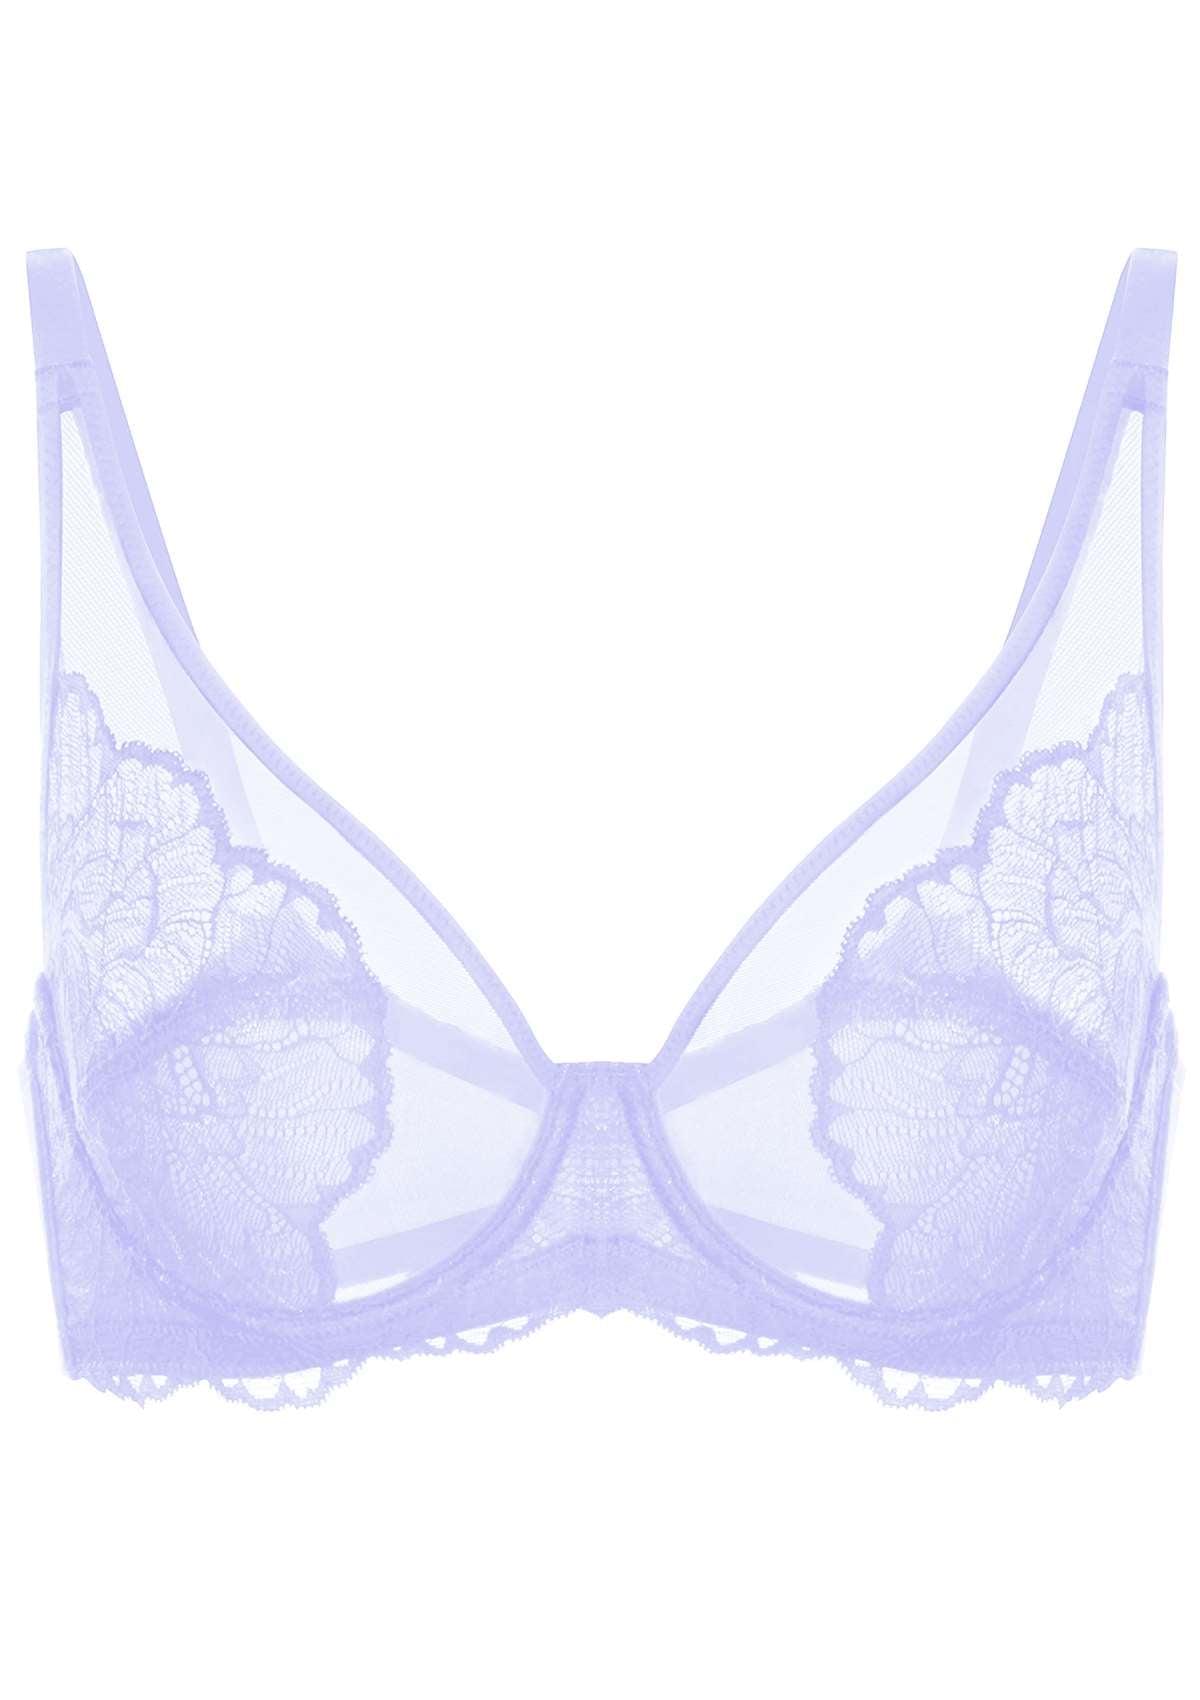 HSIA Blossom Transparent Lace Bra: Plus Size Wired Back Smoothing Bra - Light Purple / 42 / DDD/F